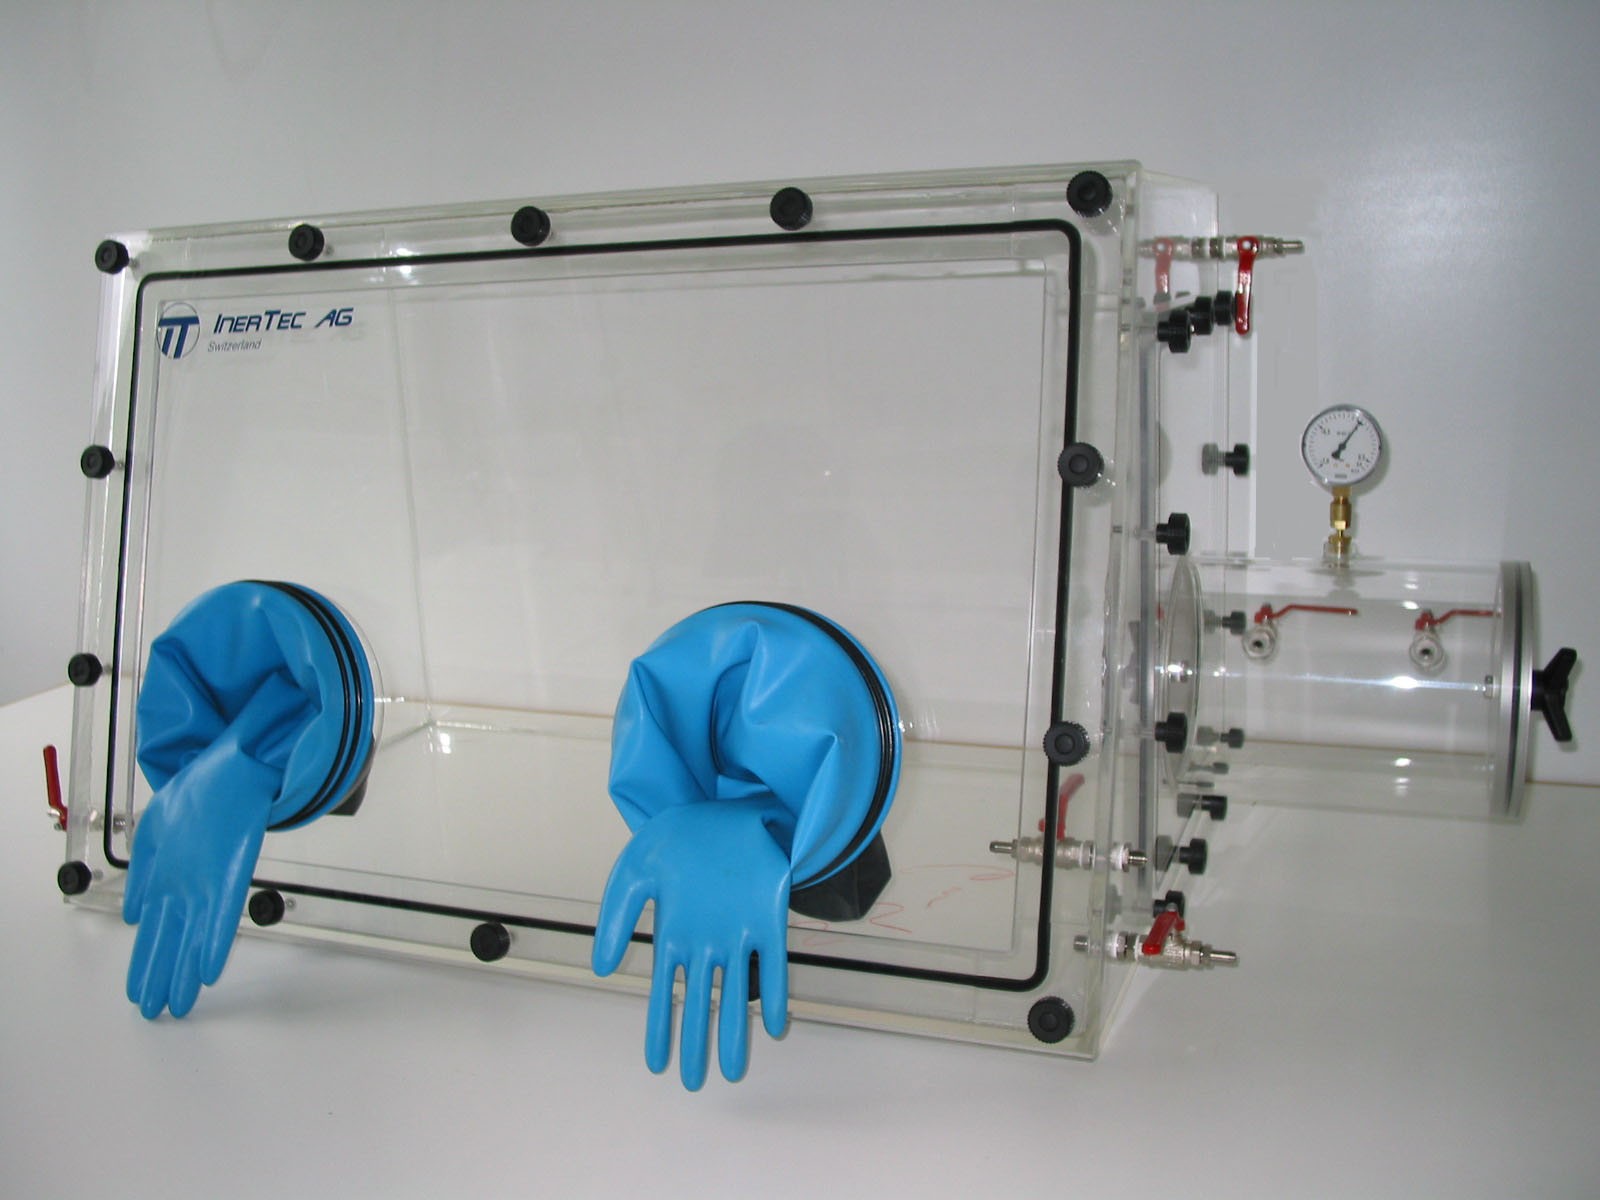 Glovebox made of acrylic &gt; Gas filling: by hand, front design: swivels upwards, side design: hinged doors